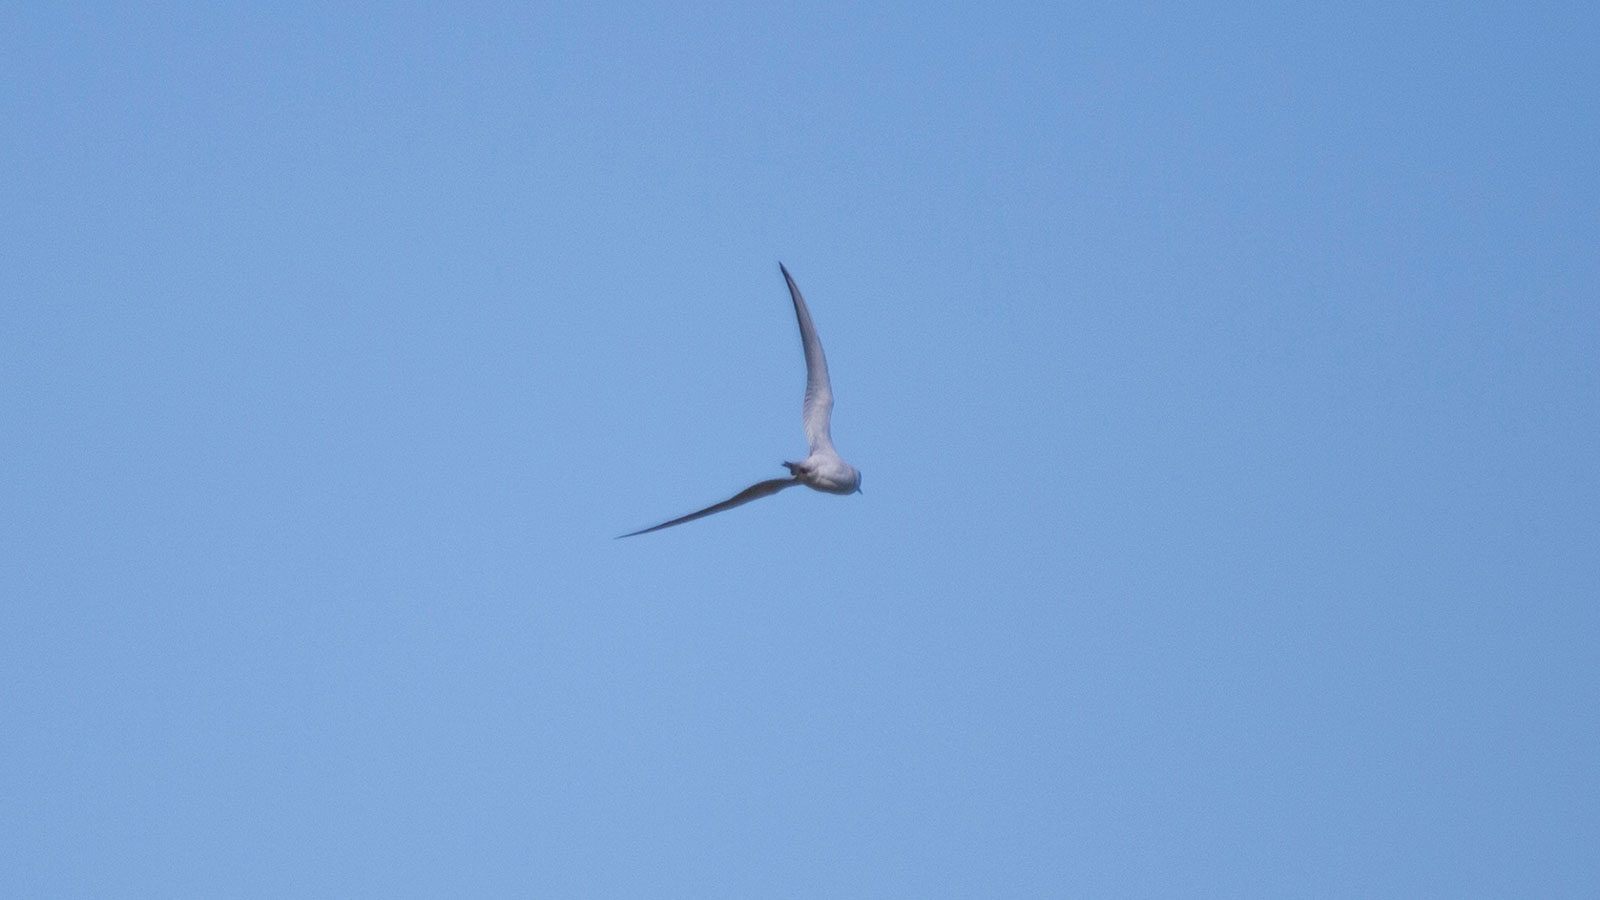 Forster's tern flying away through a blue sky